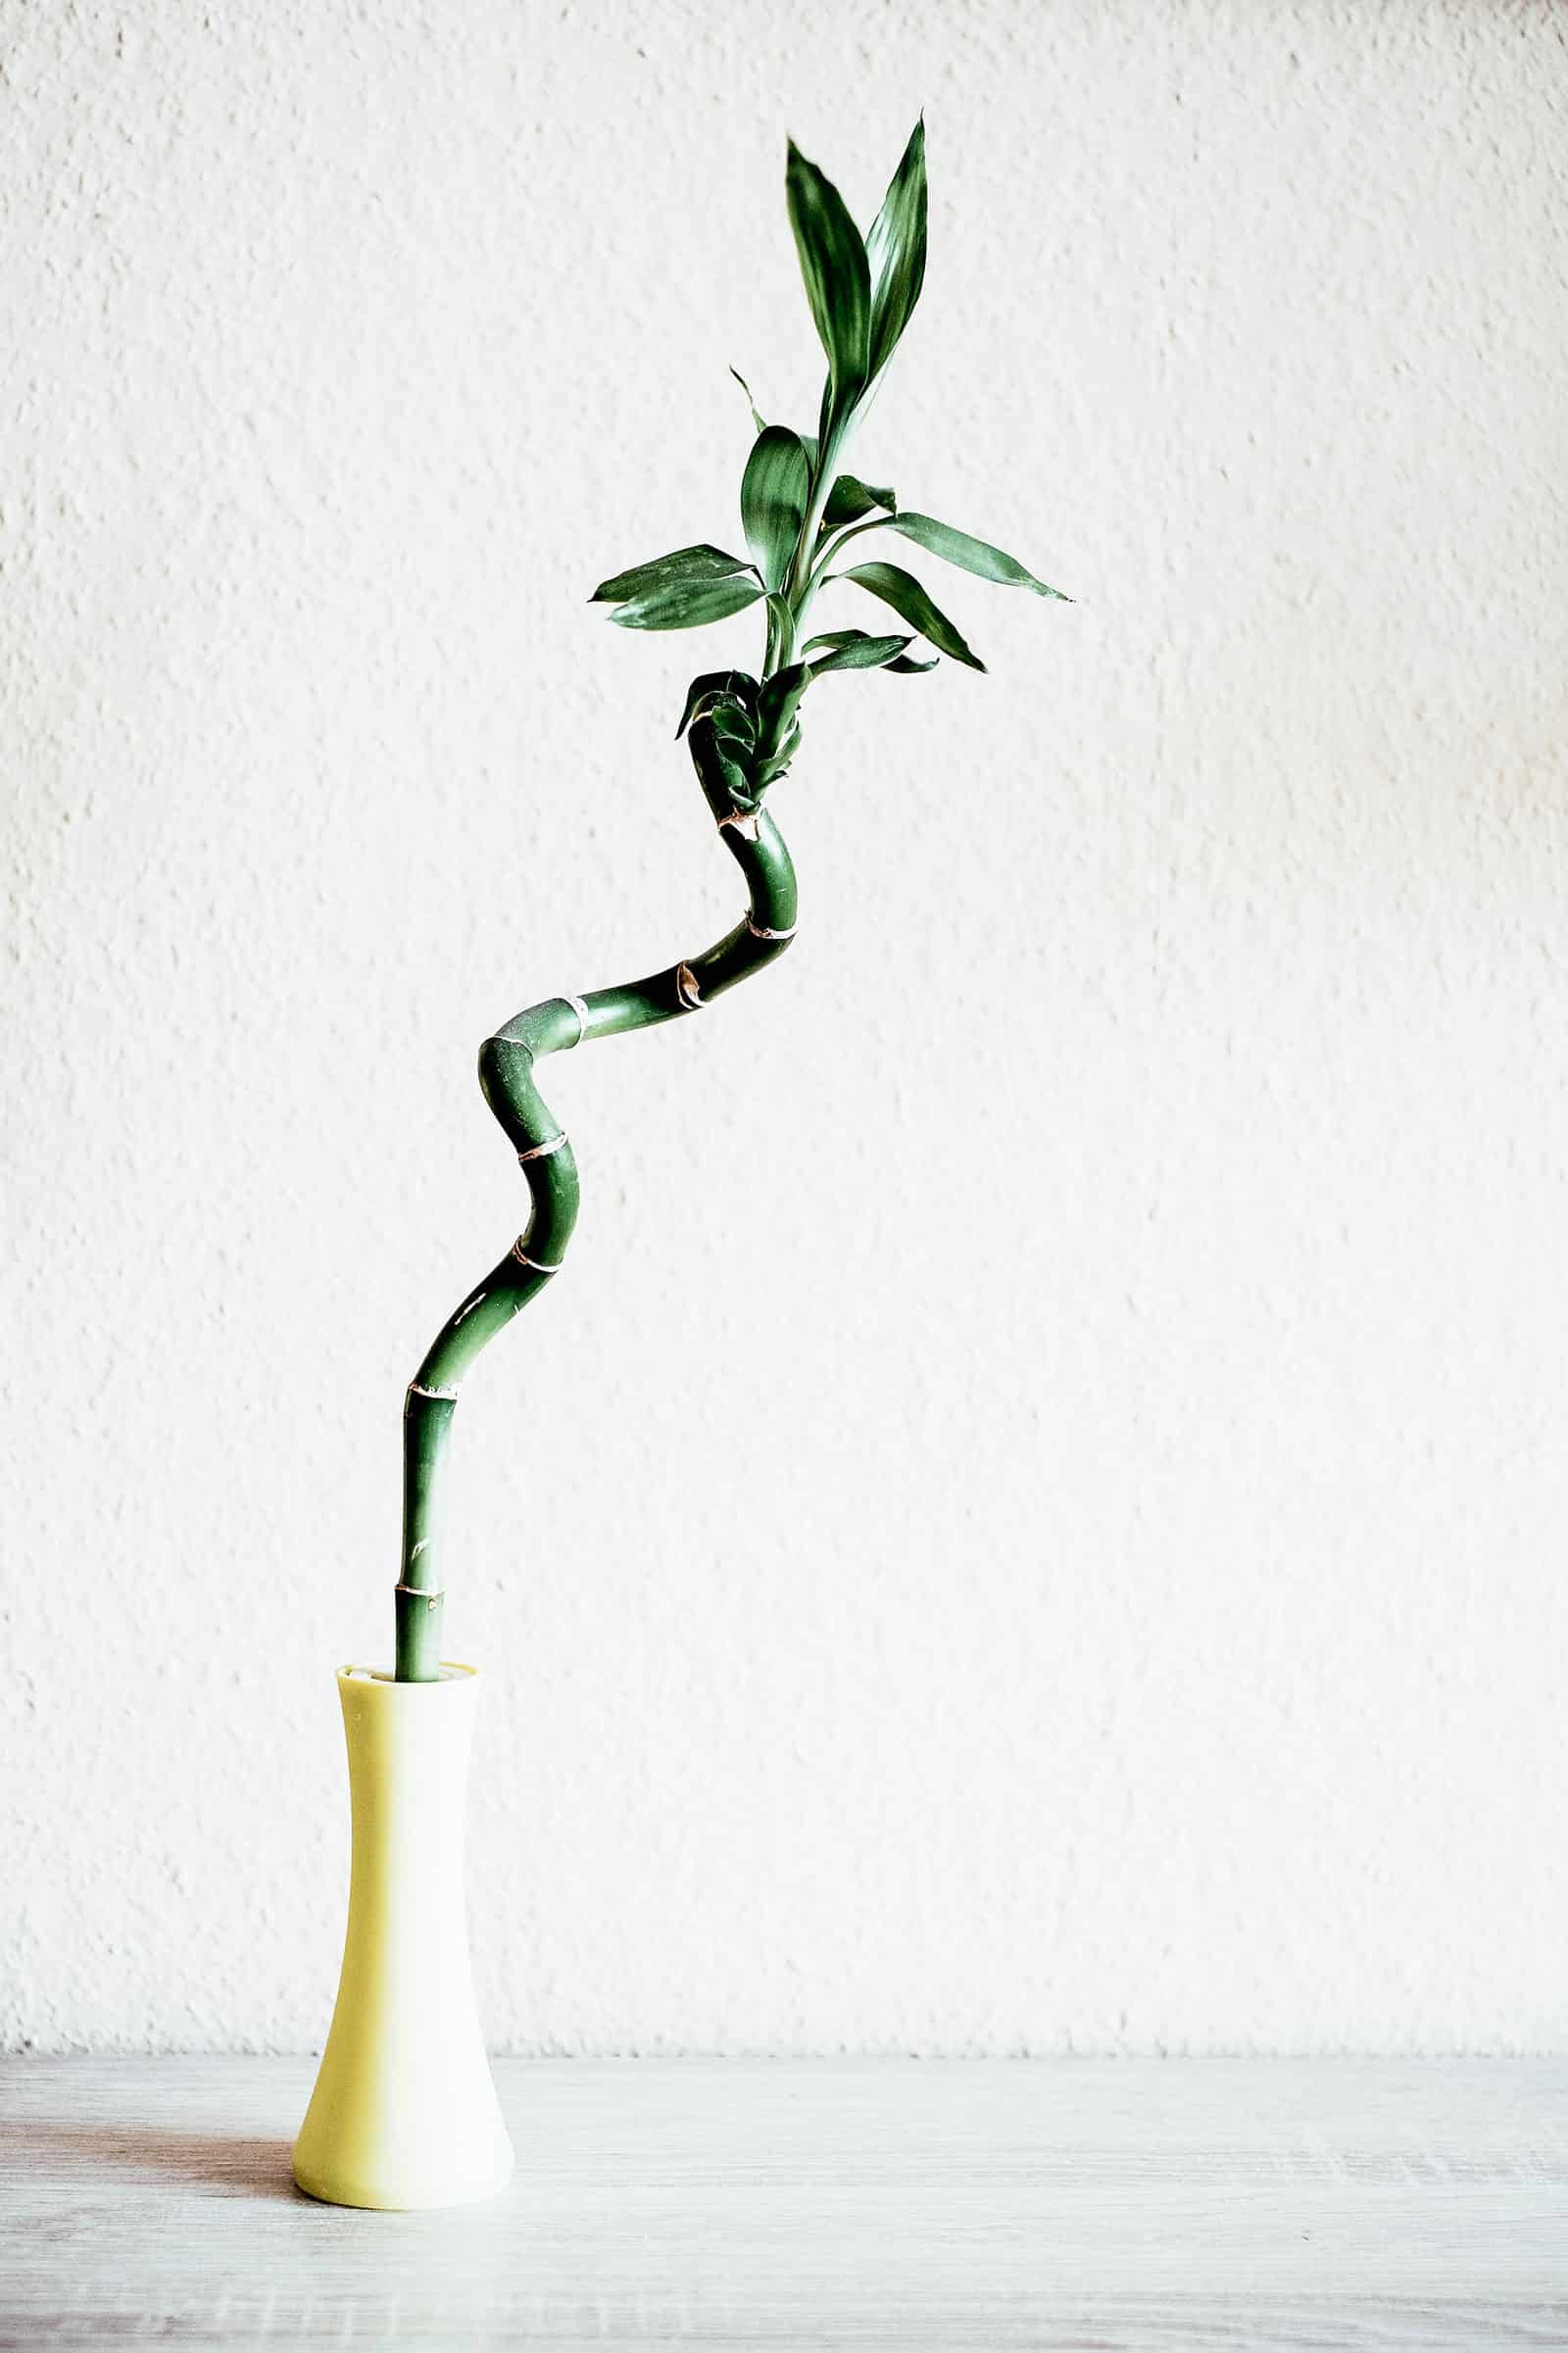 Artistic shot of a single Dracaena sanderiana (lucky bamboo) stem in a white vase against a white backdrop